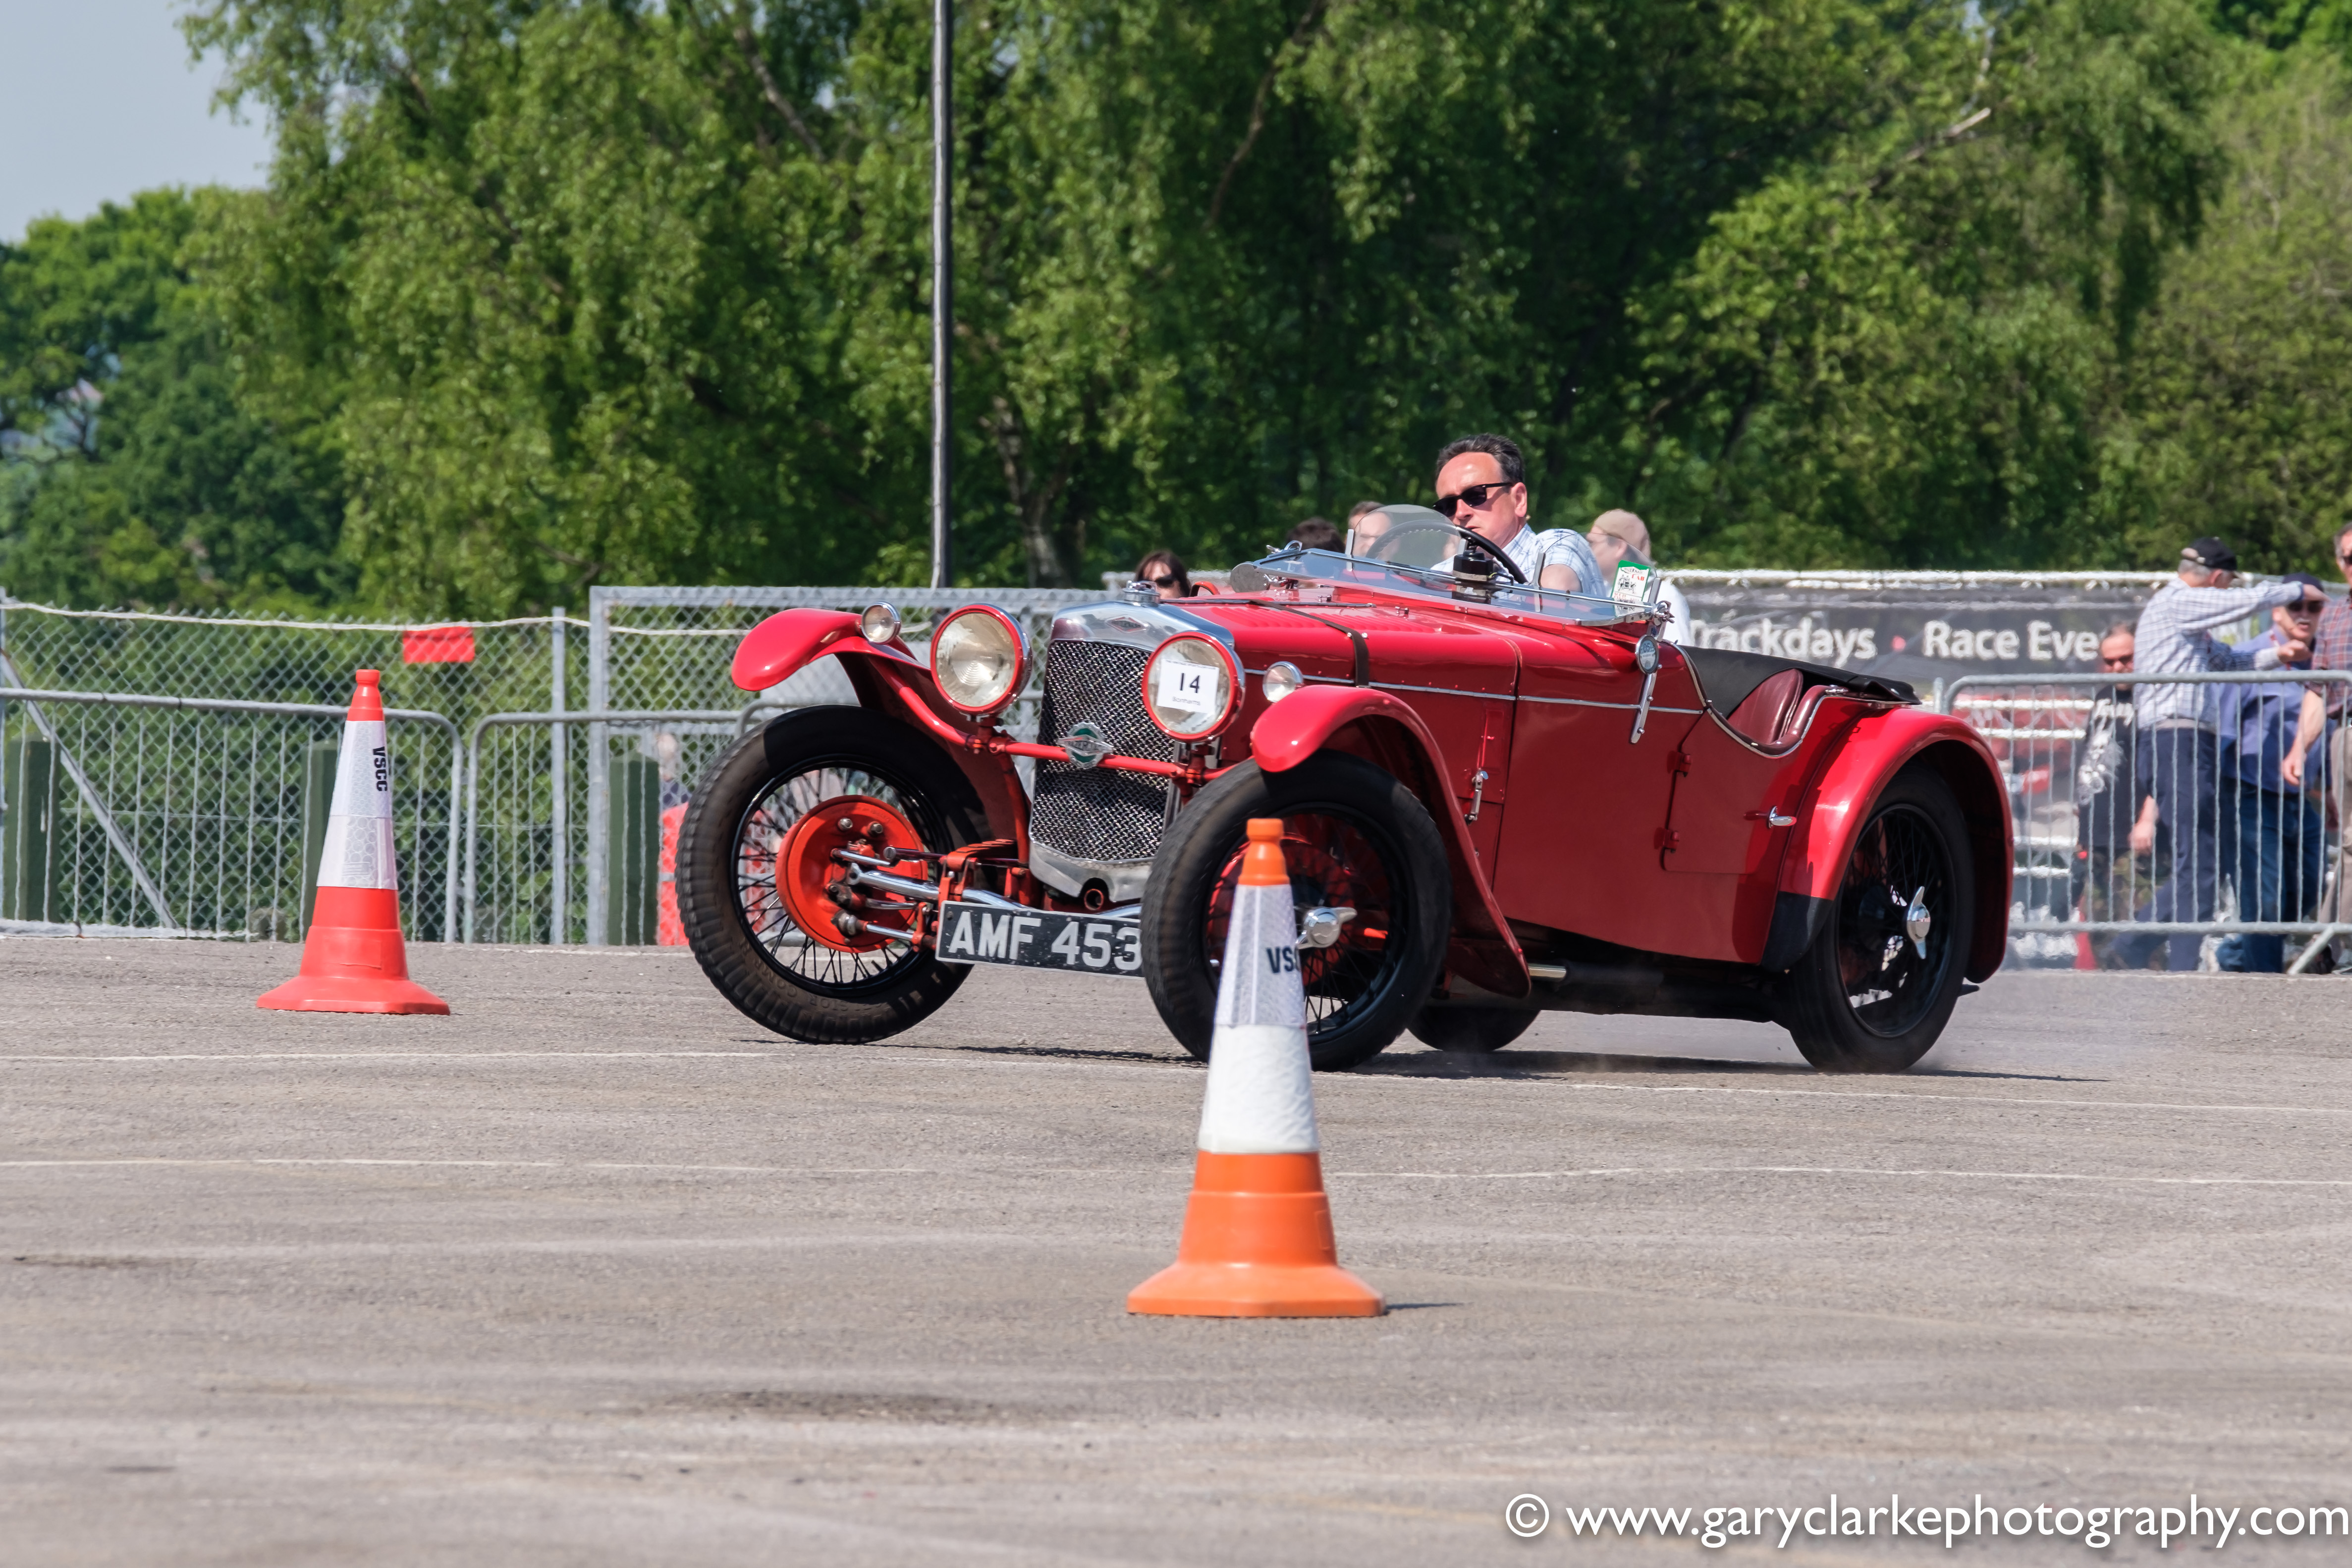 The VSCC Oulton Park AutoSolo, Cheshire Life Concours and the Suffolk Tour cover